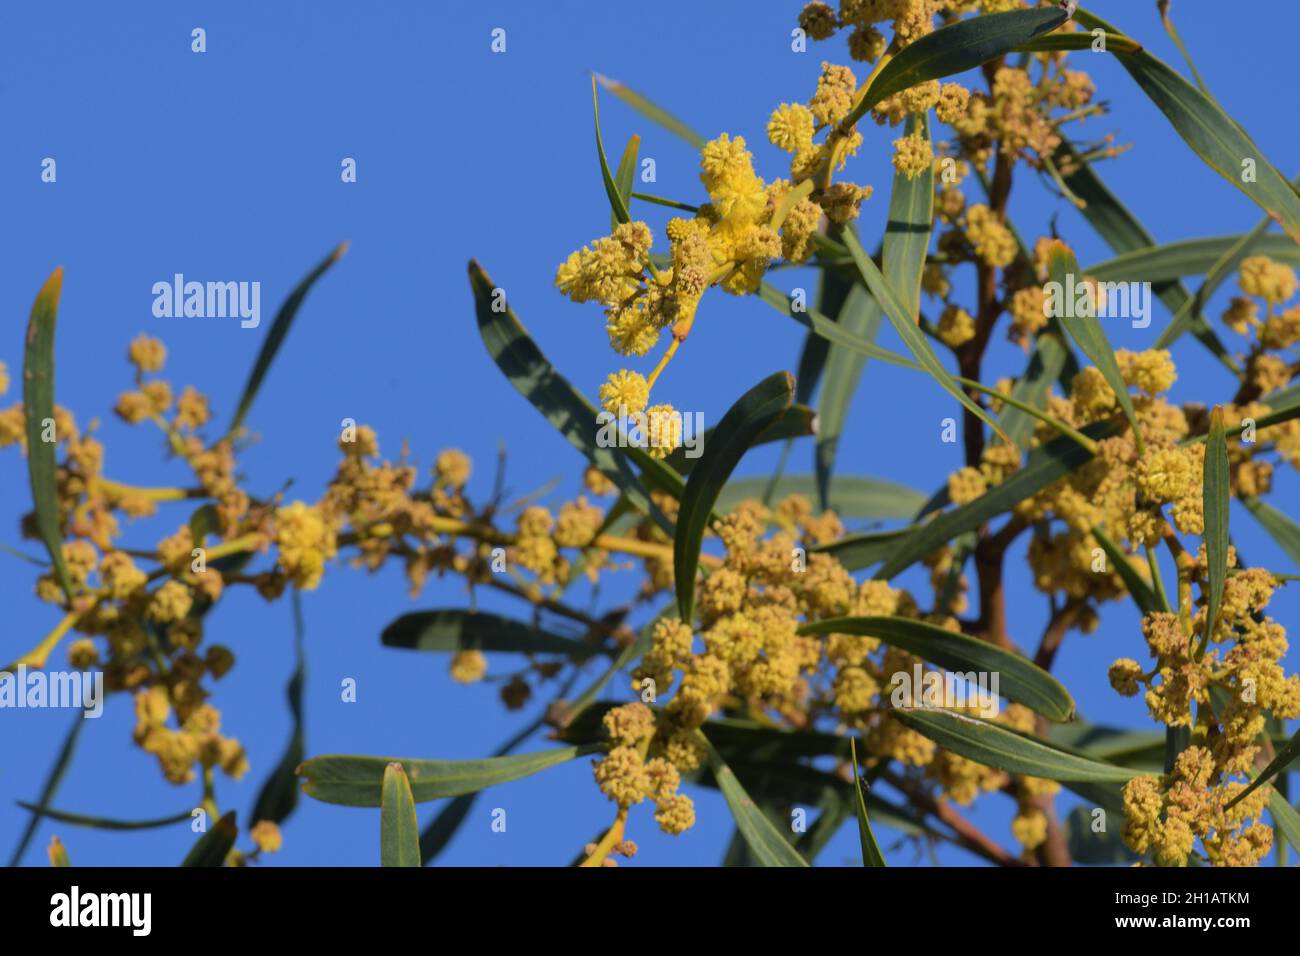 Yellow flowers and leaves of an Acacia (Wattle) tree on the NSW Central Coast, Australia Stock Photo